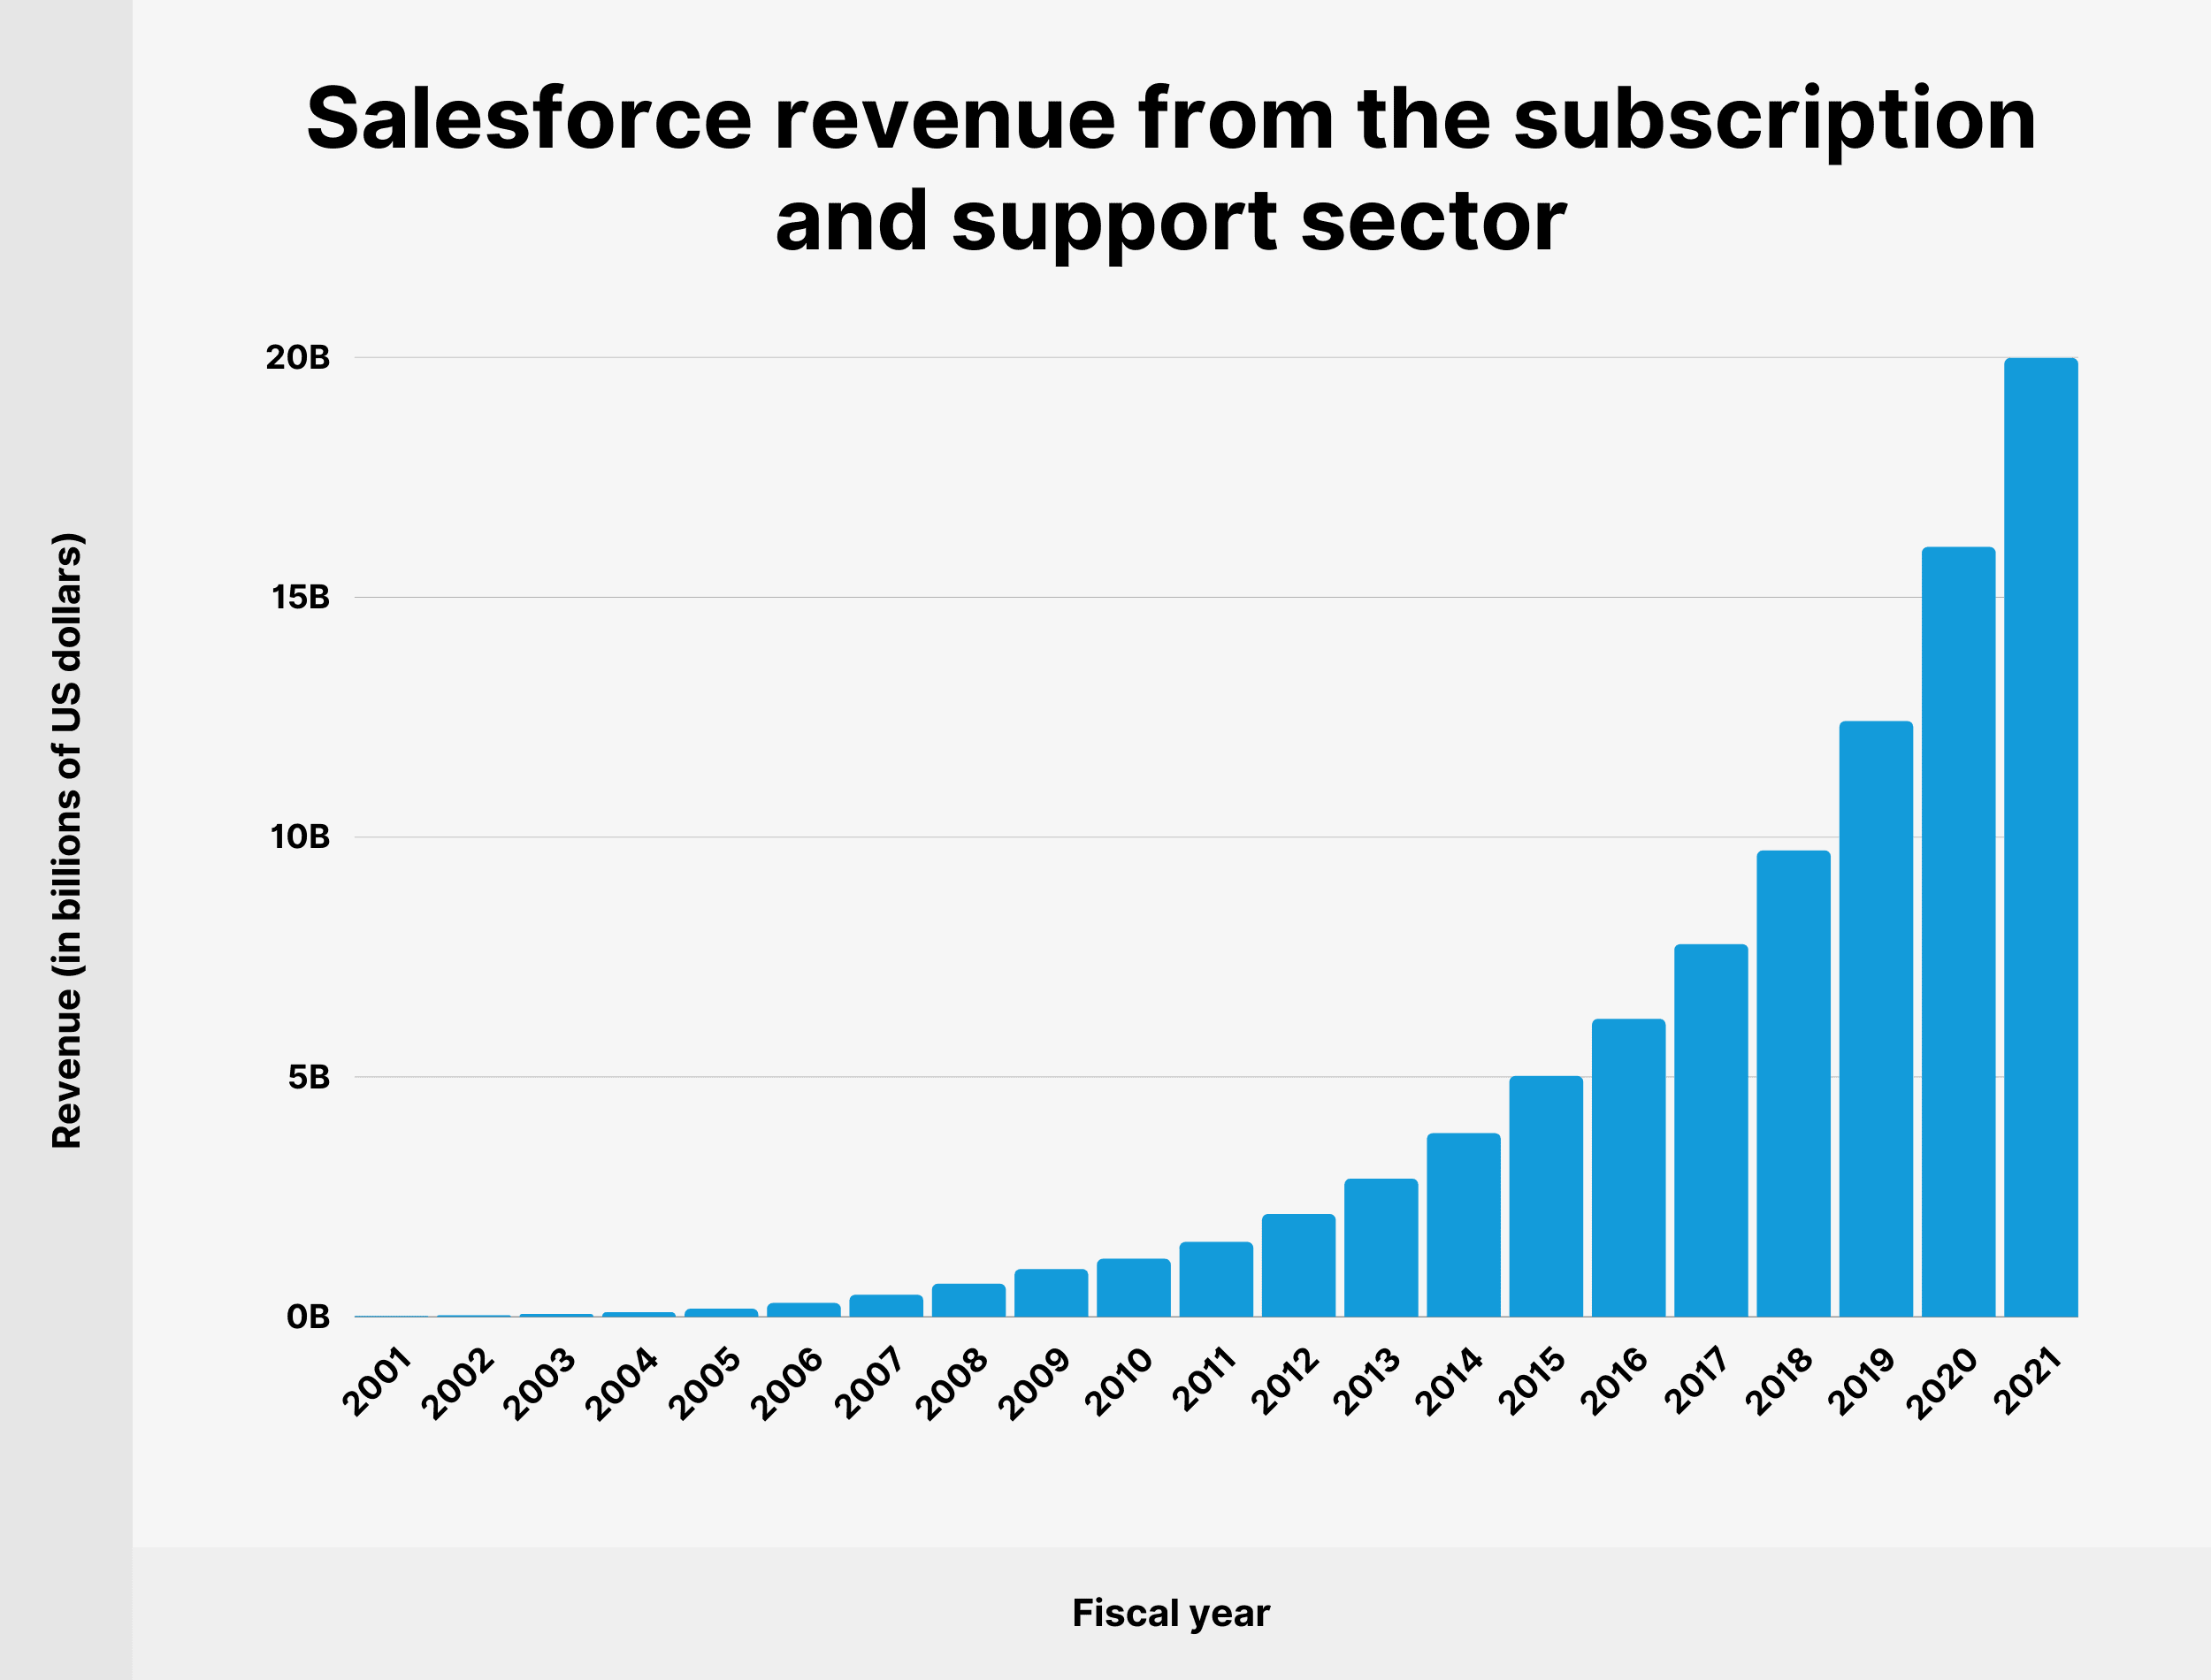 Salesforce revenue from the subscription and support sector